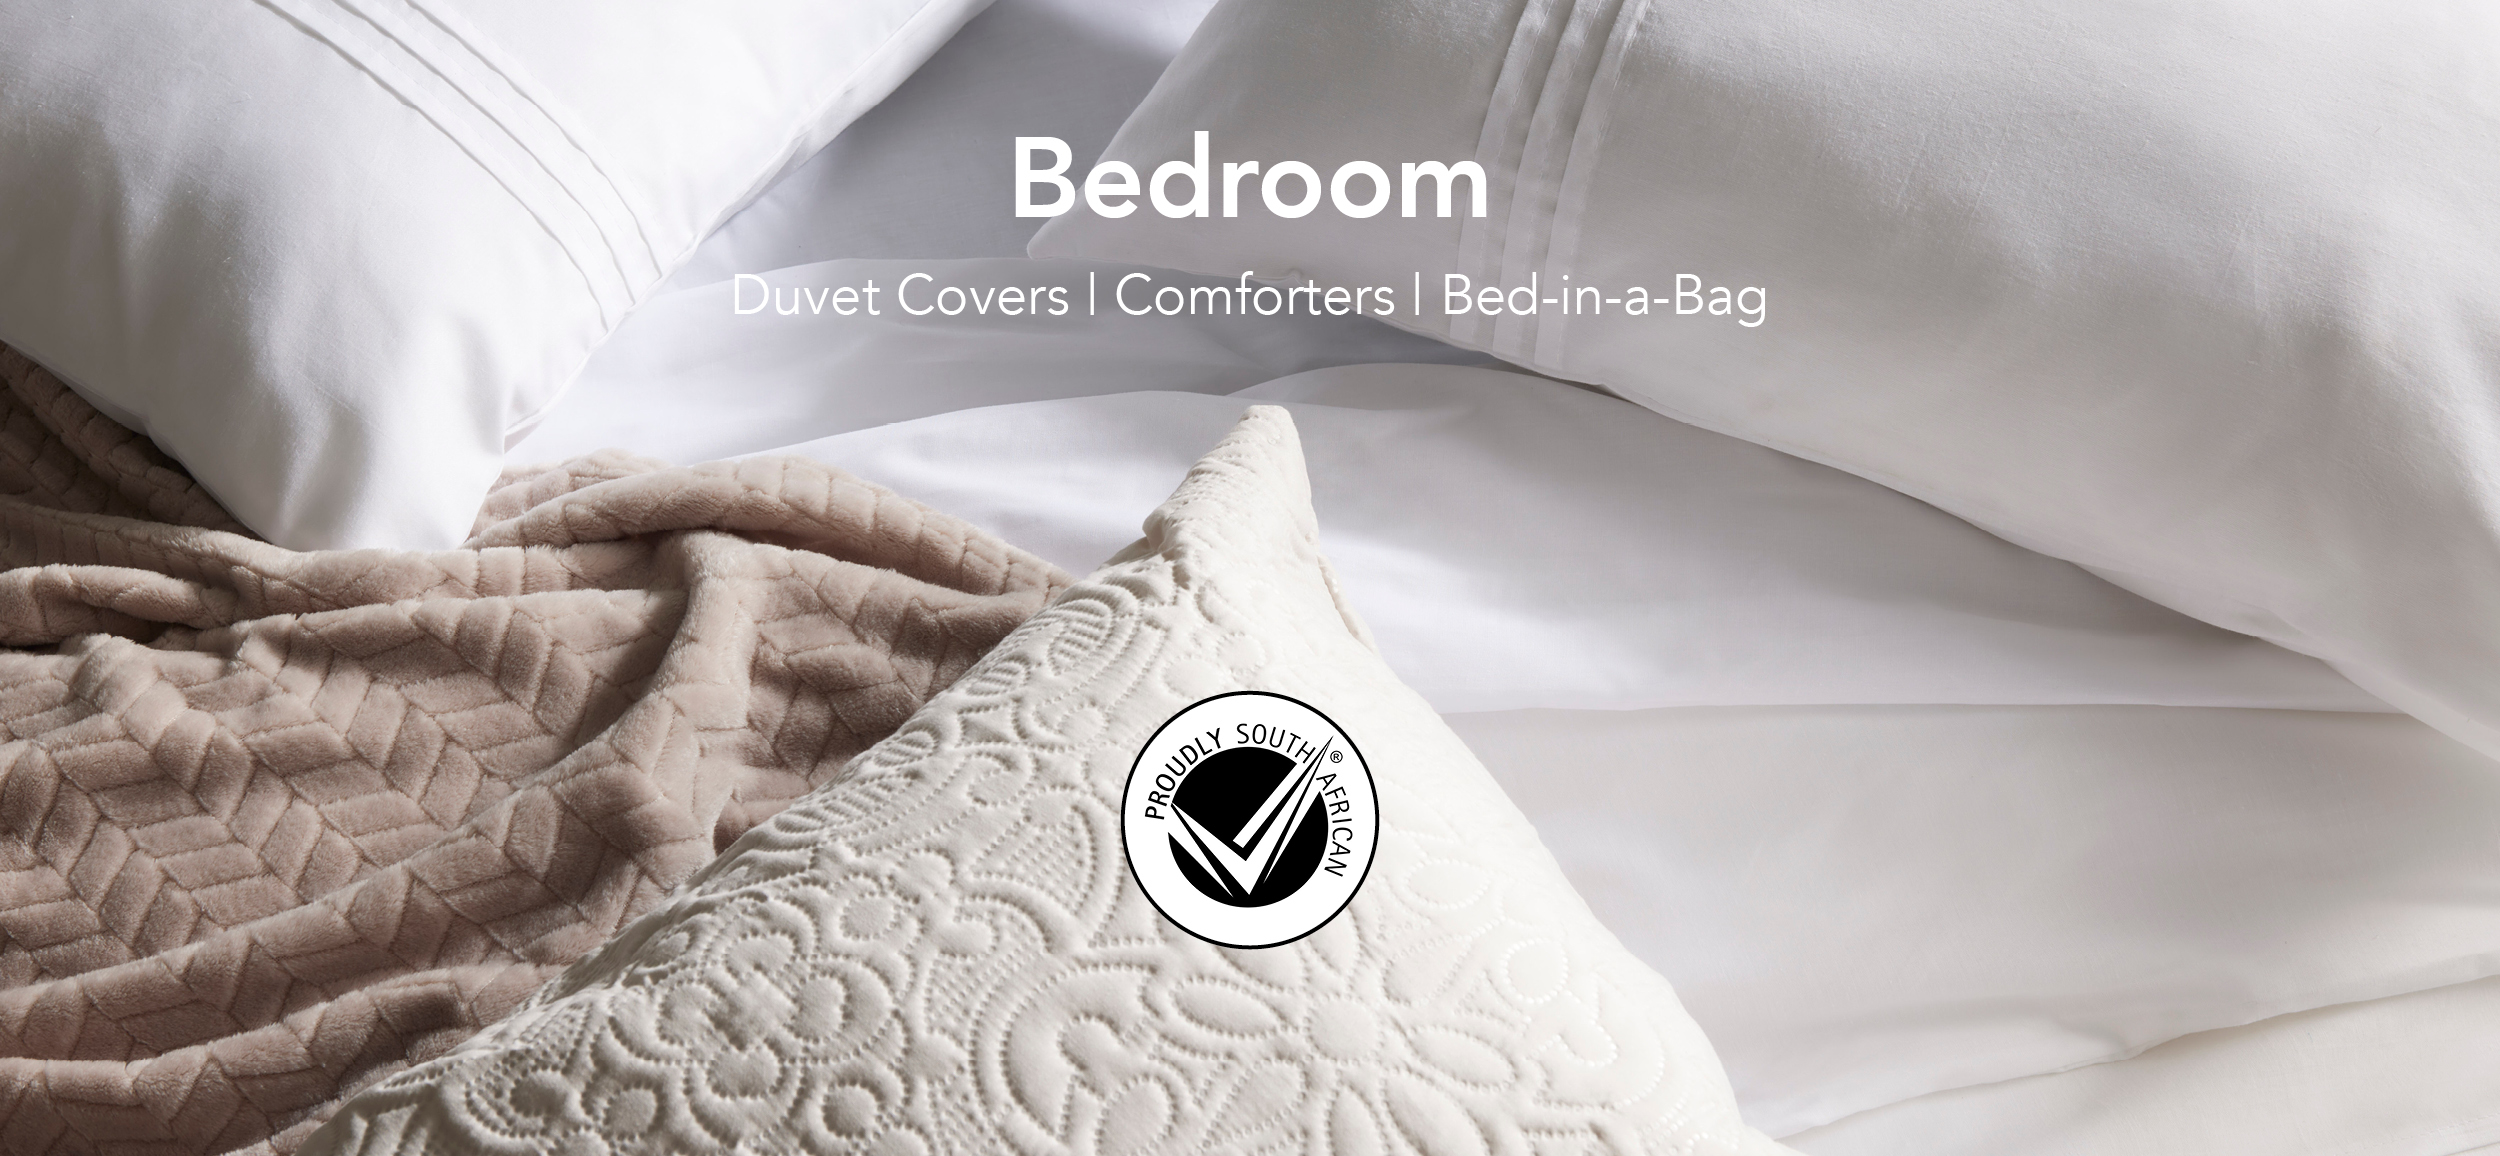 Locally made duvets, comforters and sheeting.